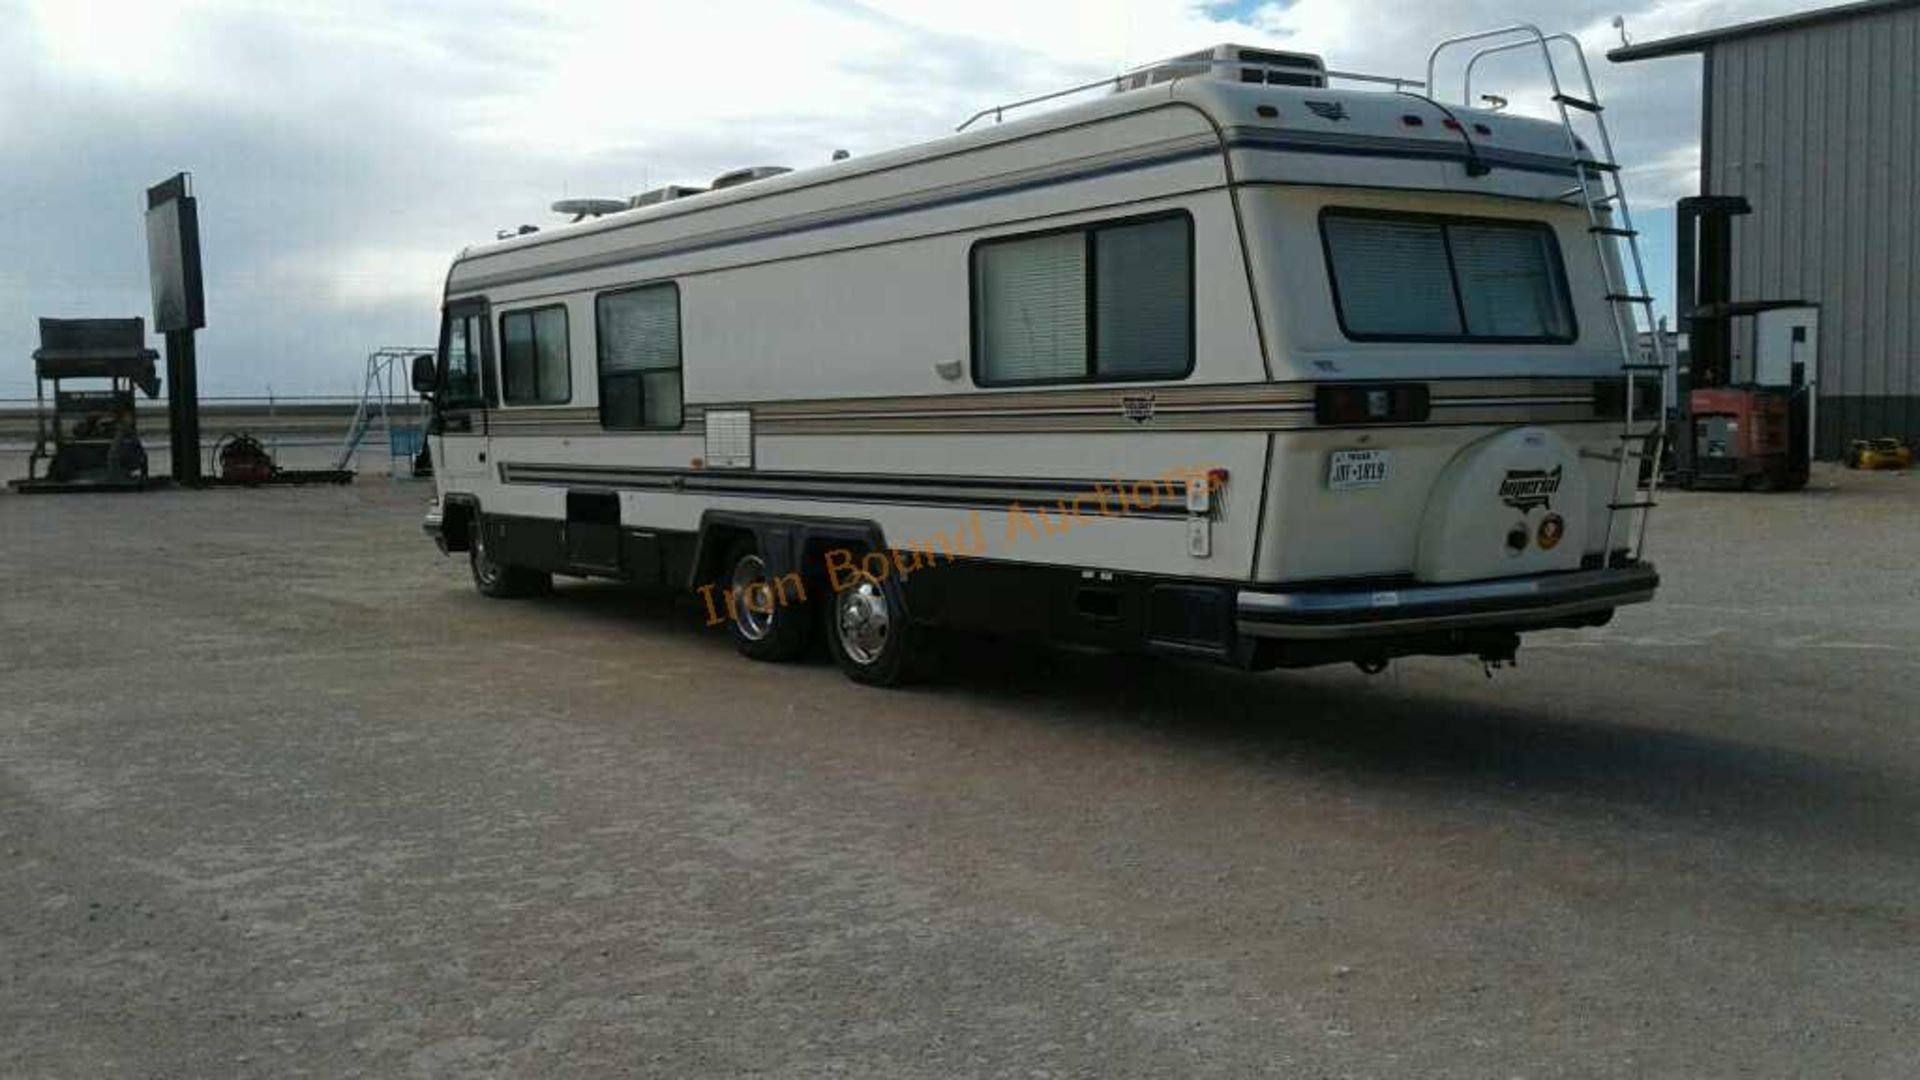 1989 Holiday Rambler Imperial Motorhome - Image 3 of 25